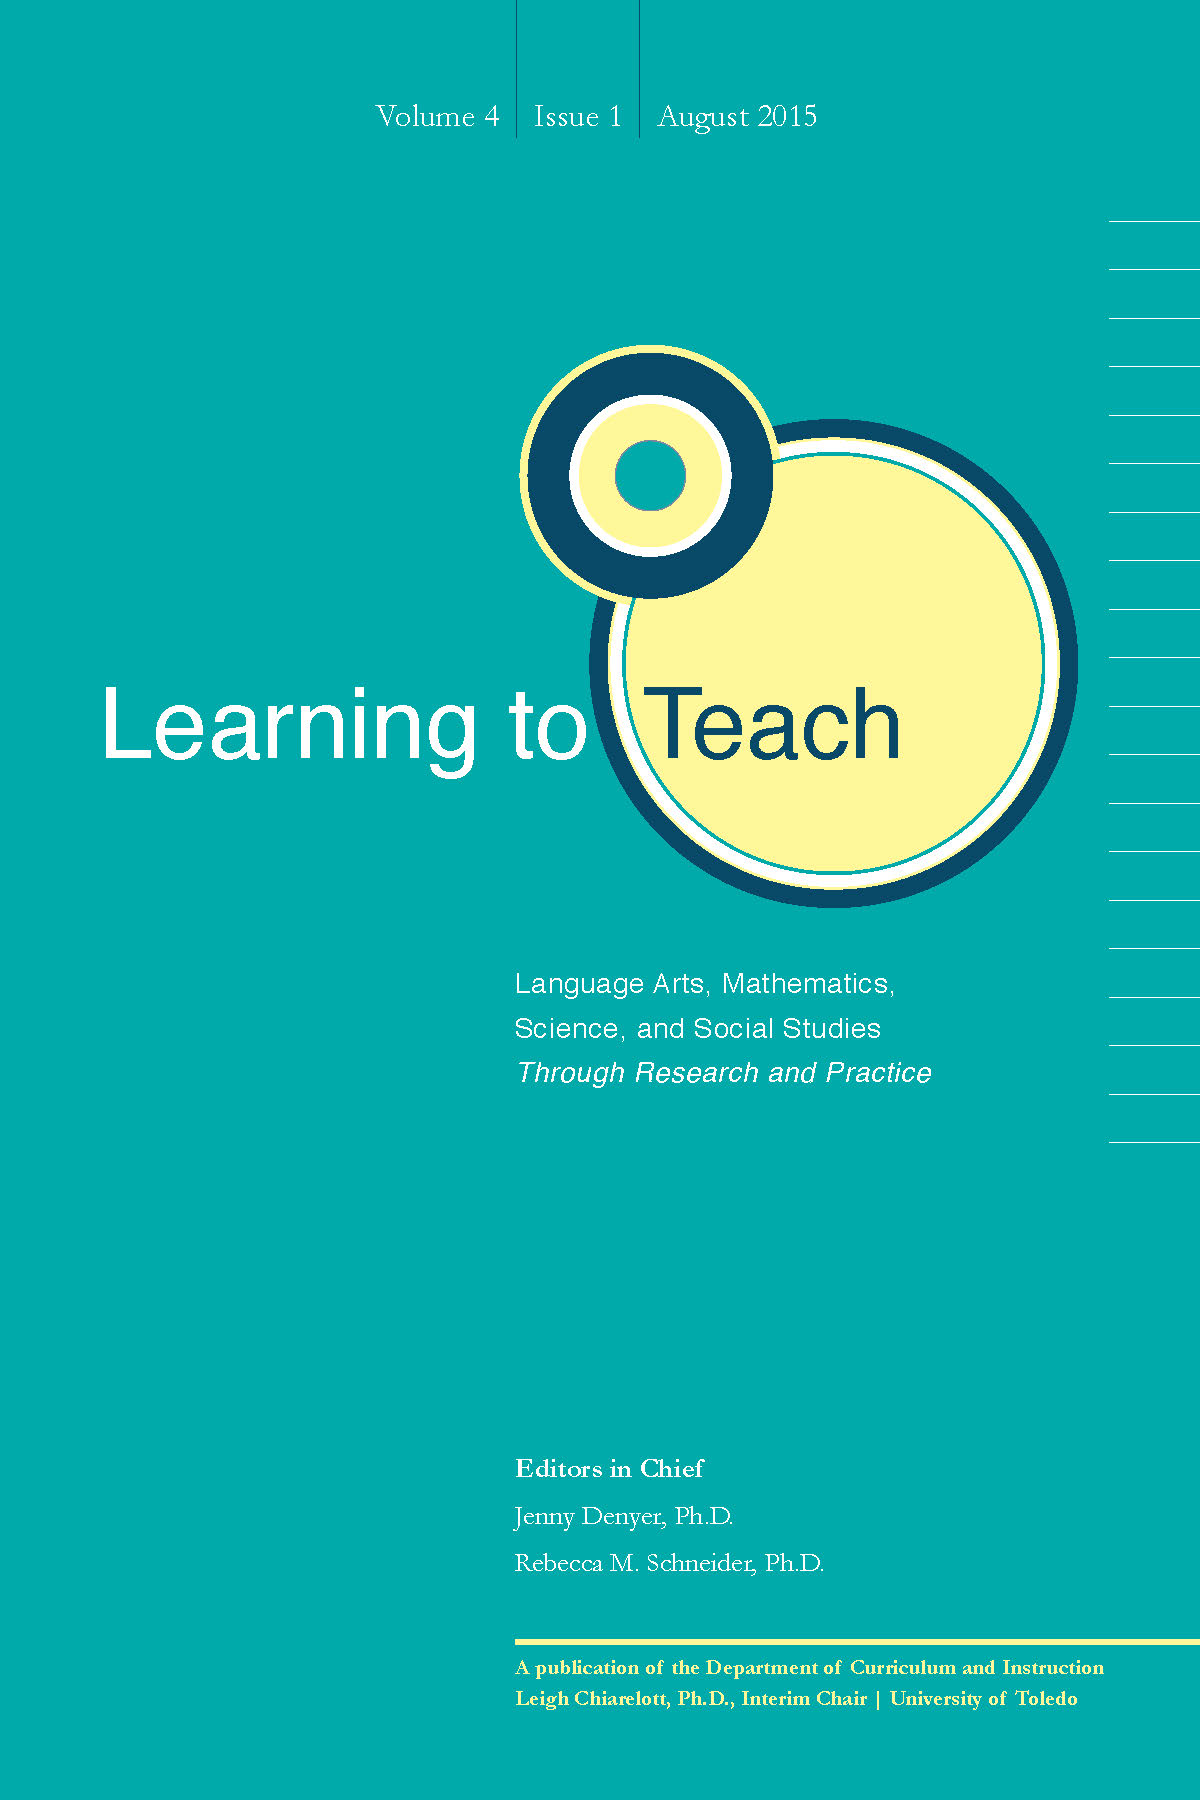 					View Vol. 4 No. 1 (2015): Learning to Teach Language Arts, Mathematics, Science, and Social Studies Through Research and Practice
				